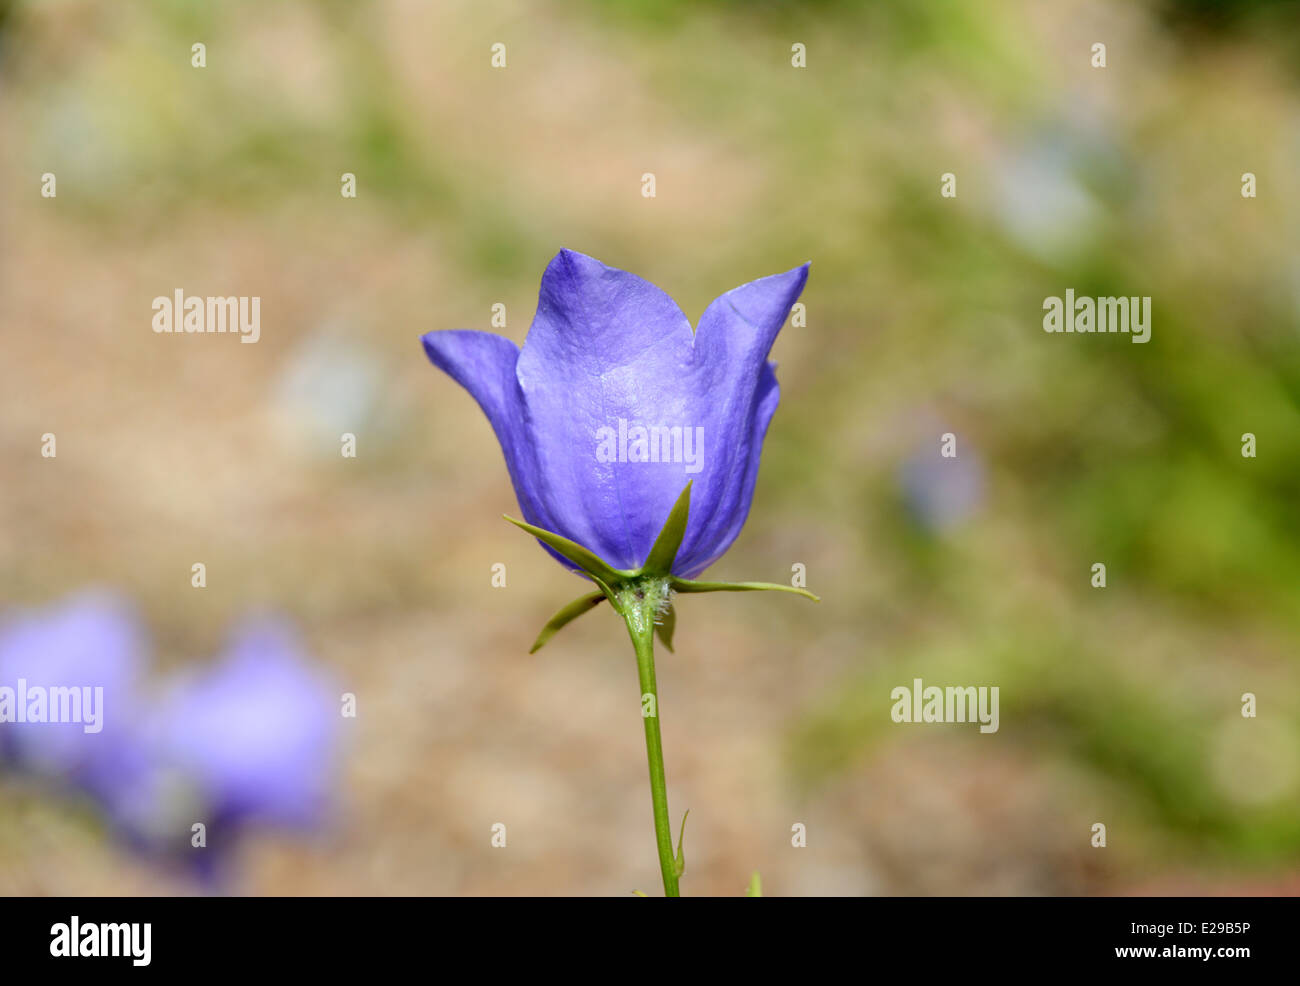 Profile of blue campanula flower in shallow focus Stock Photo